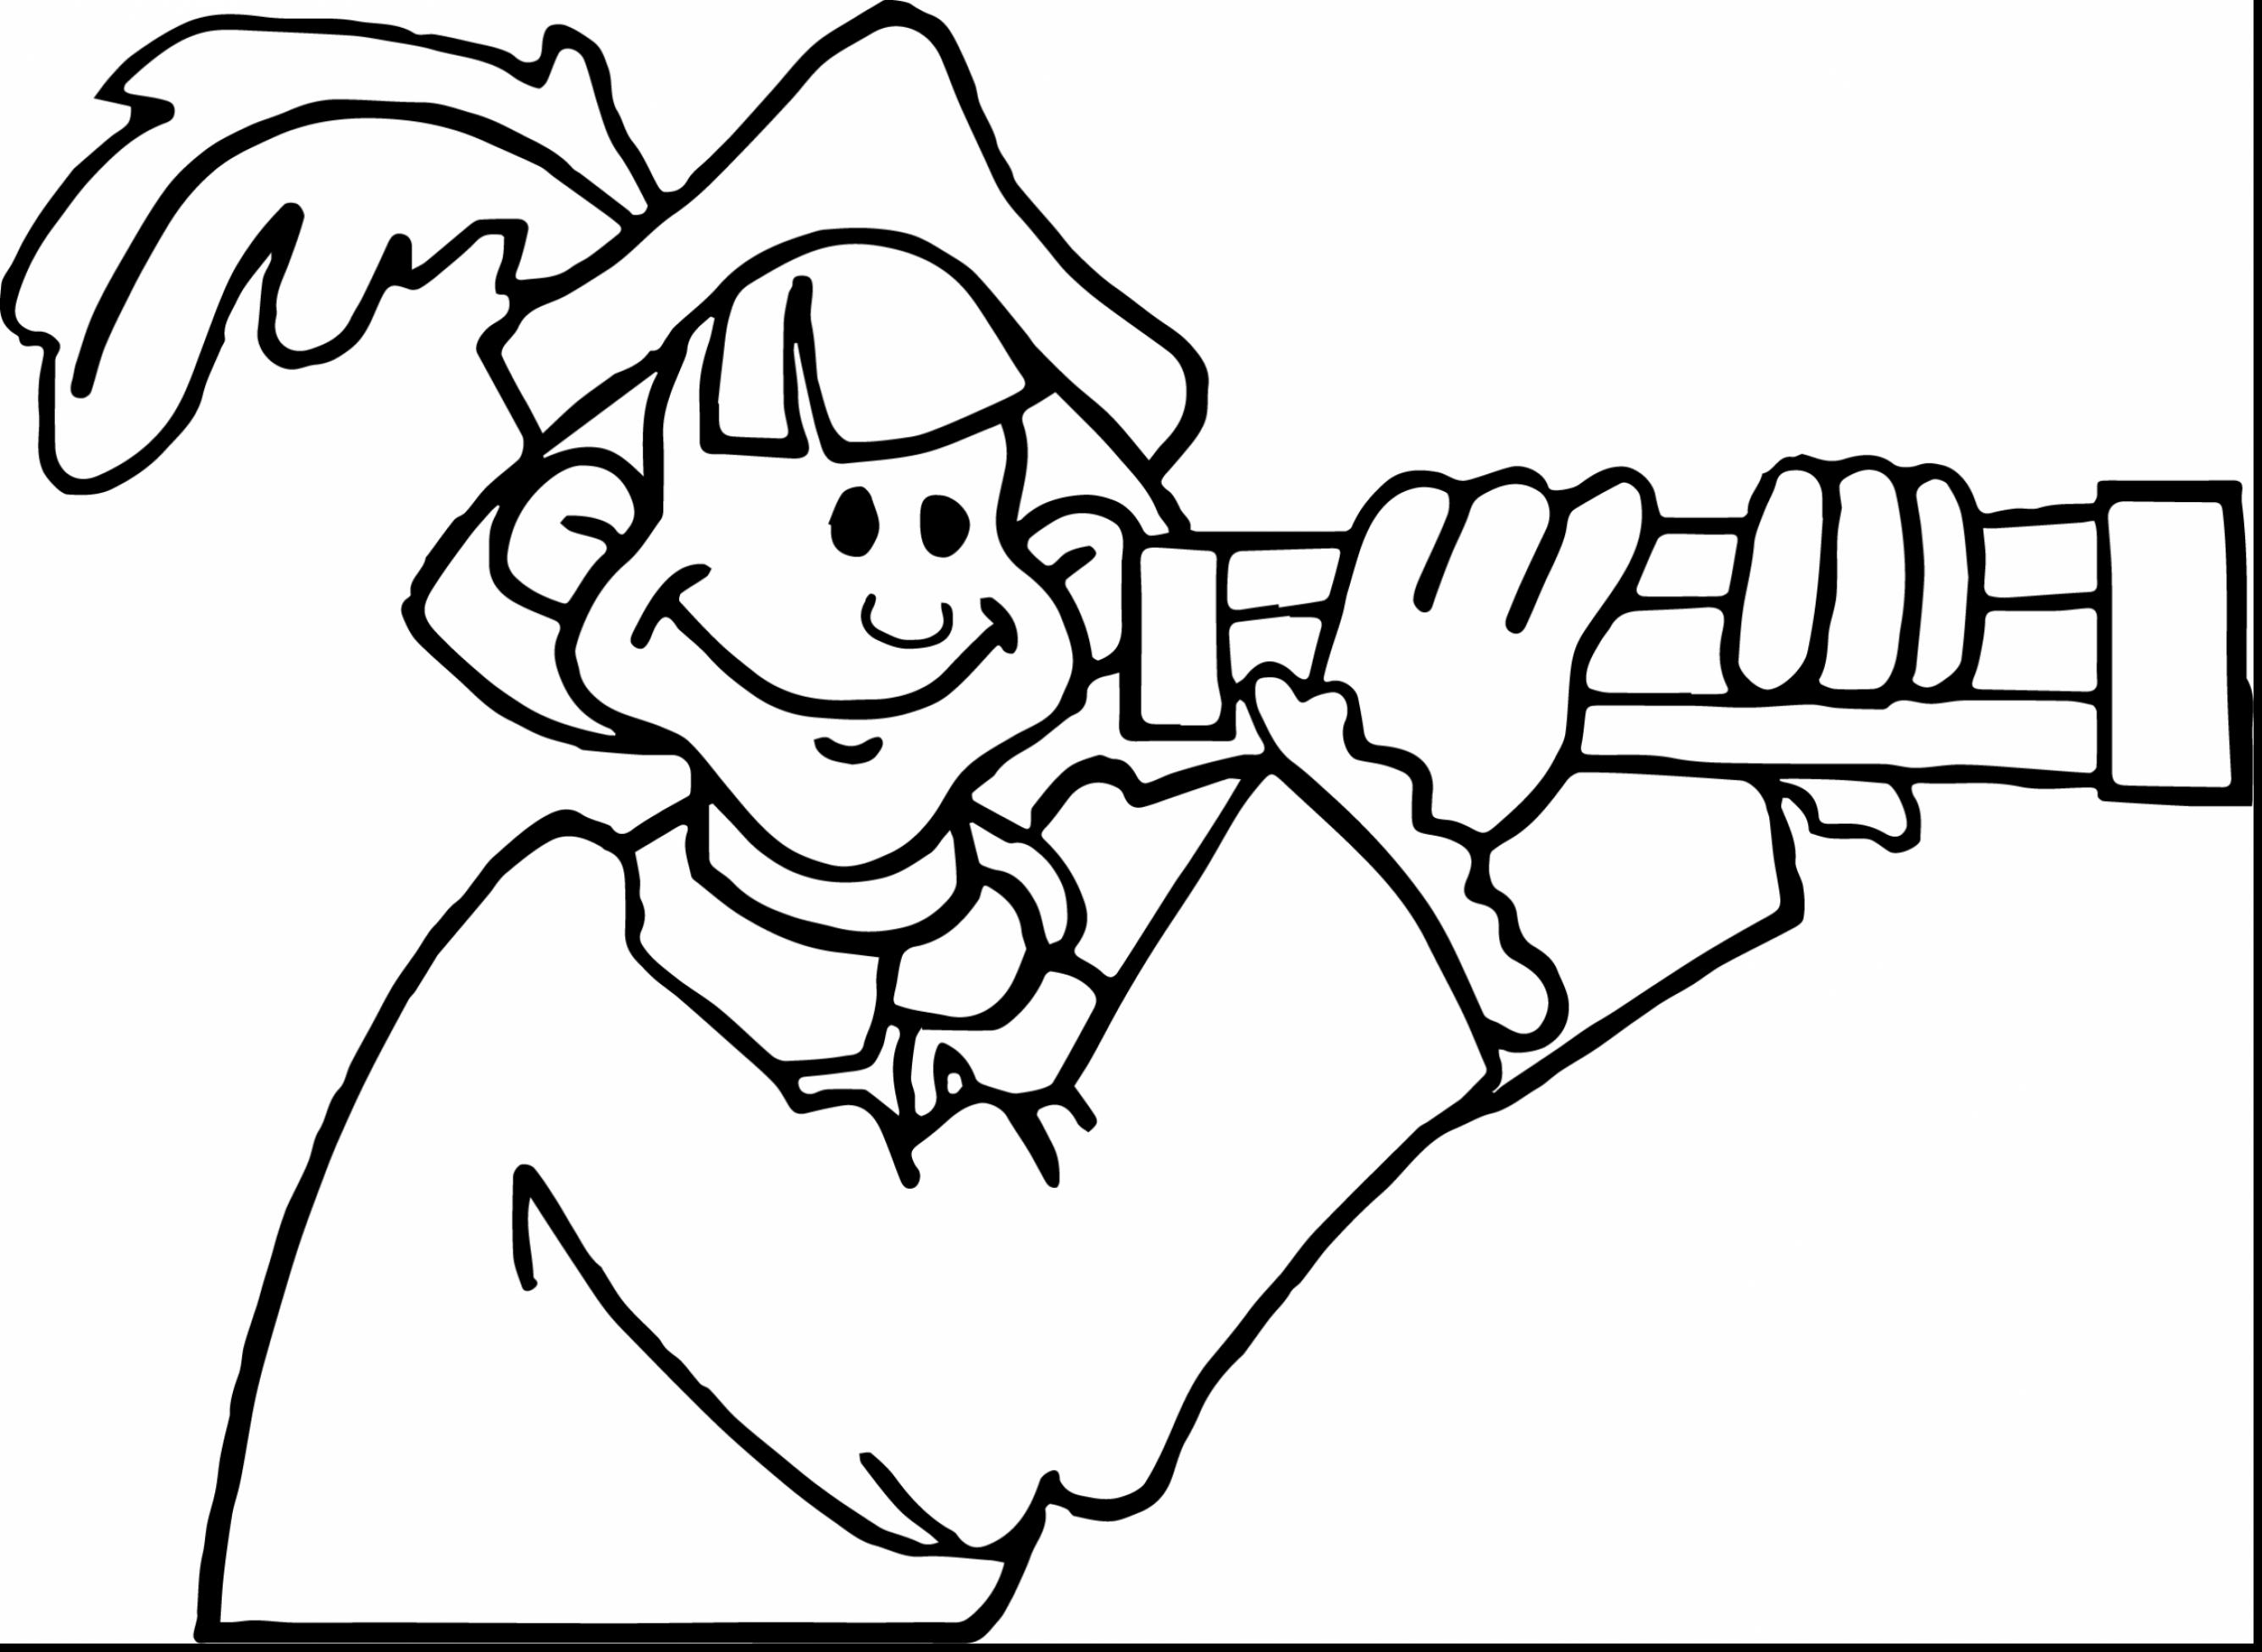 Christopher Columbus Coloring Pages Christopher Columbus Coloring Pages Coloringsuite